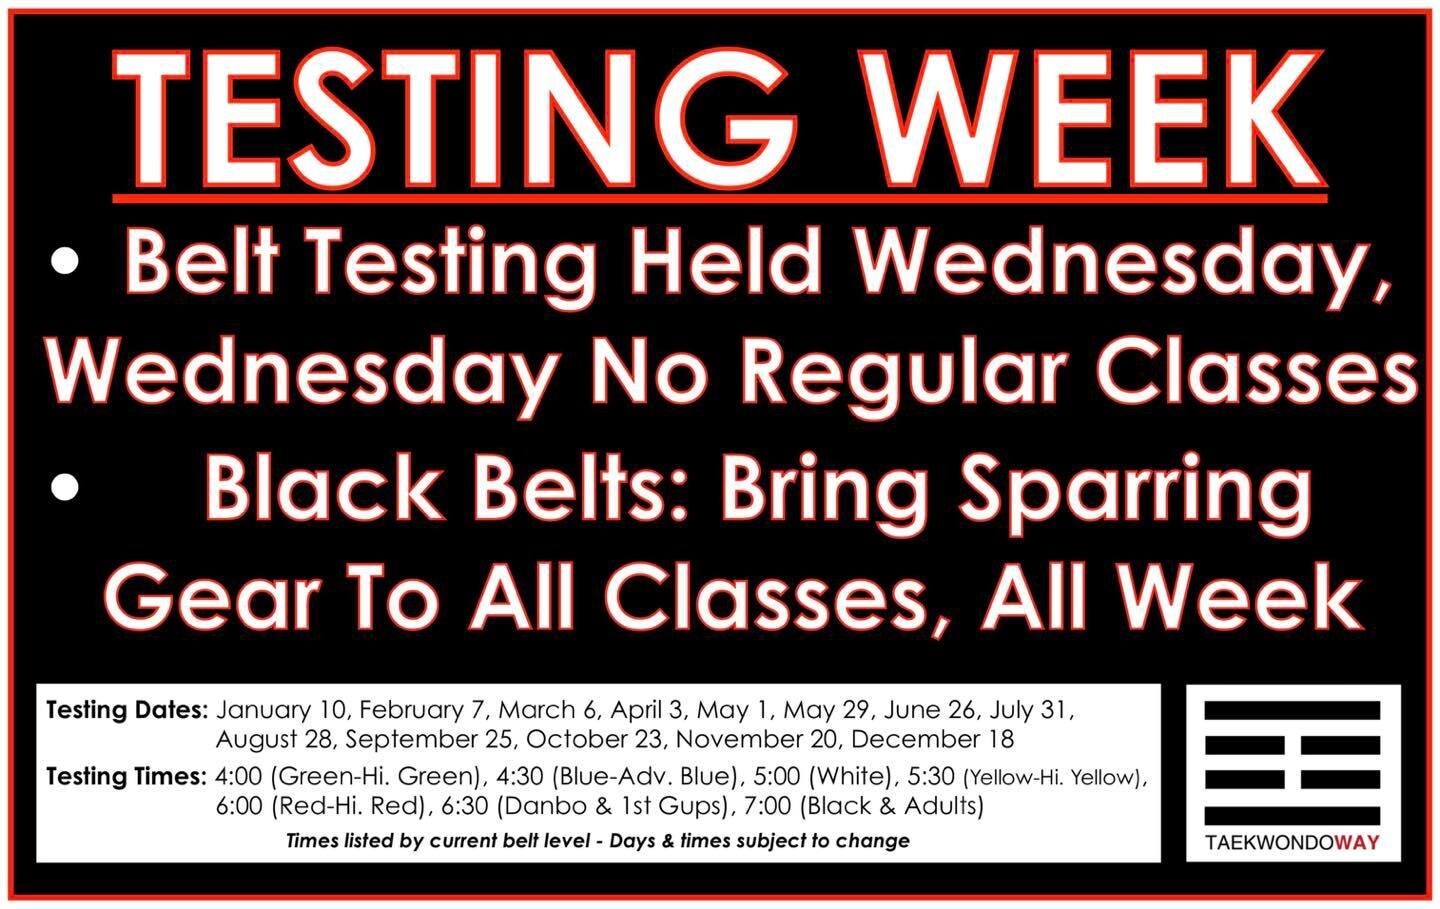 Belt testing is this Wednesday.